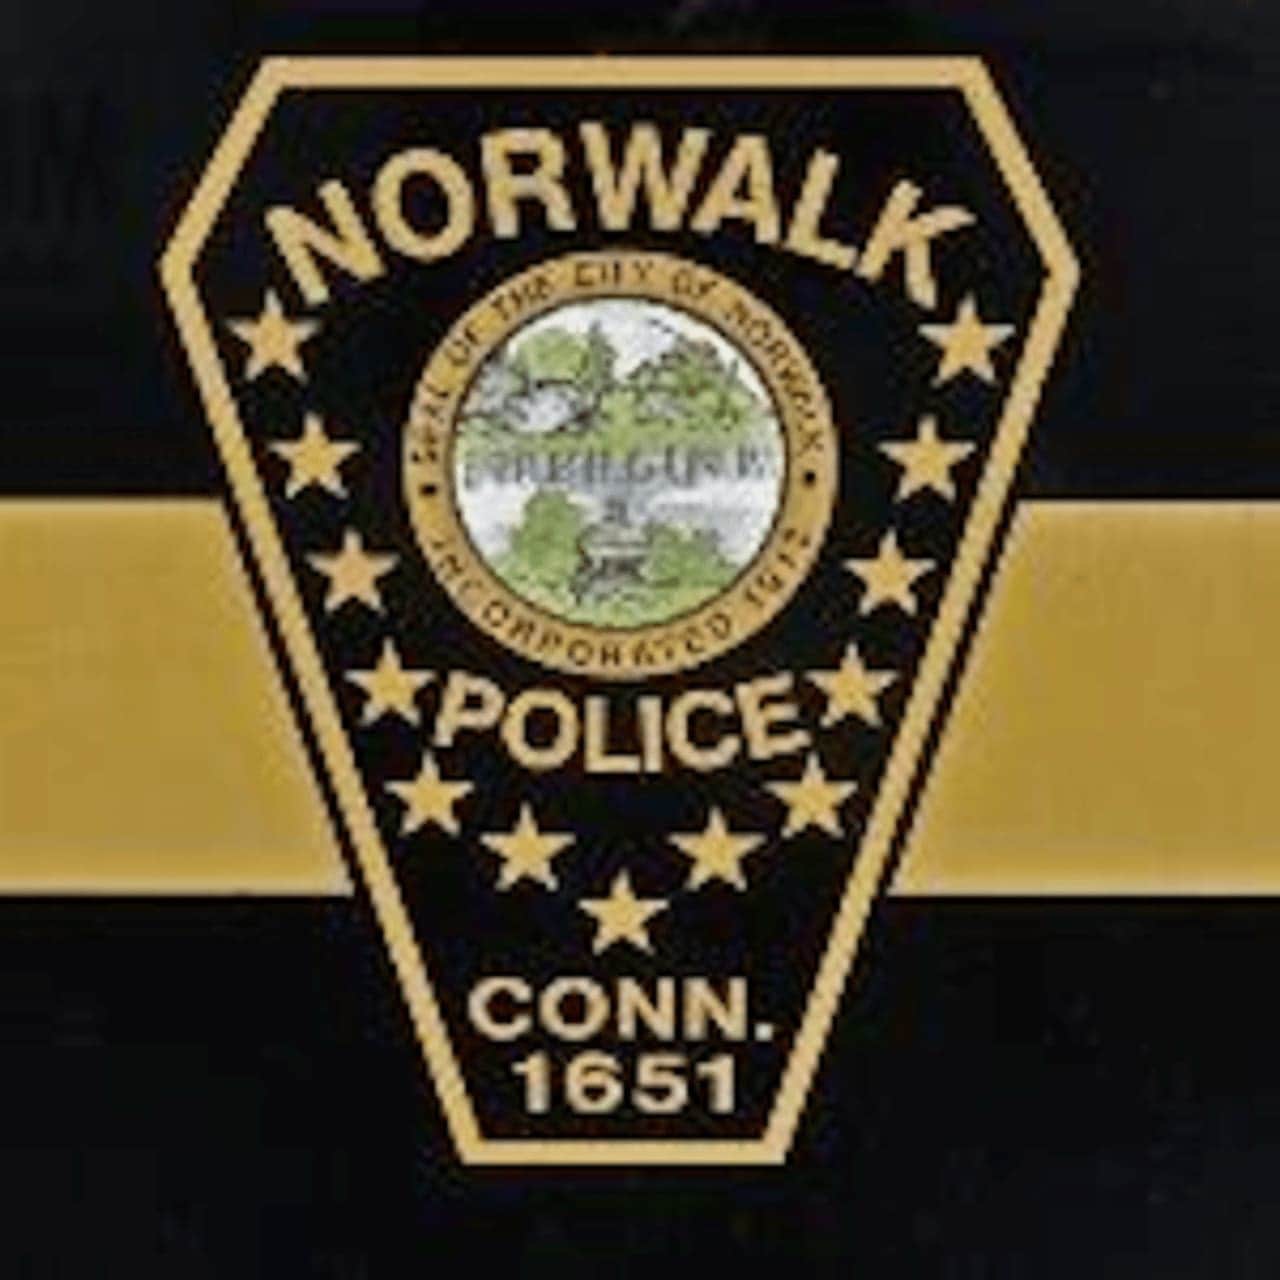 The newest officer to join the Norwalk Police Department is a Hispanic woman.